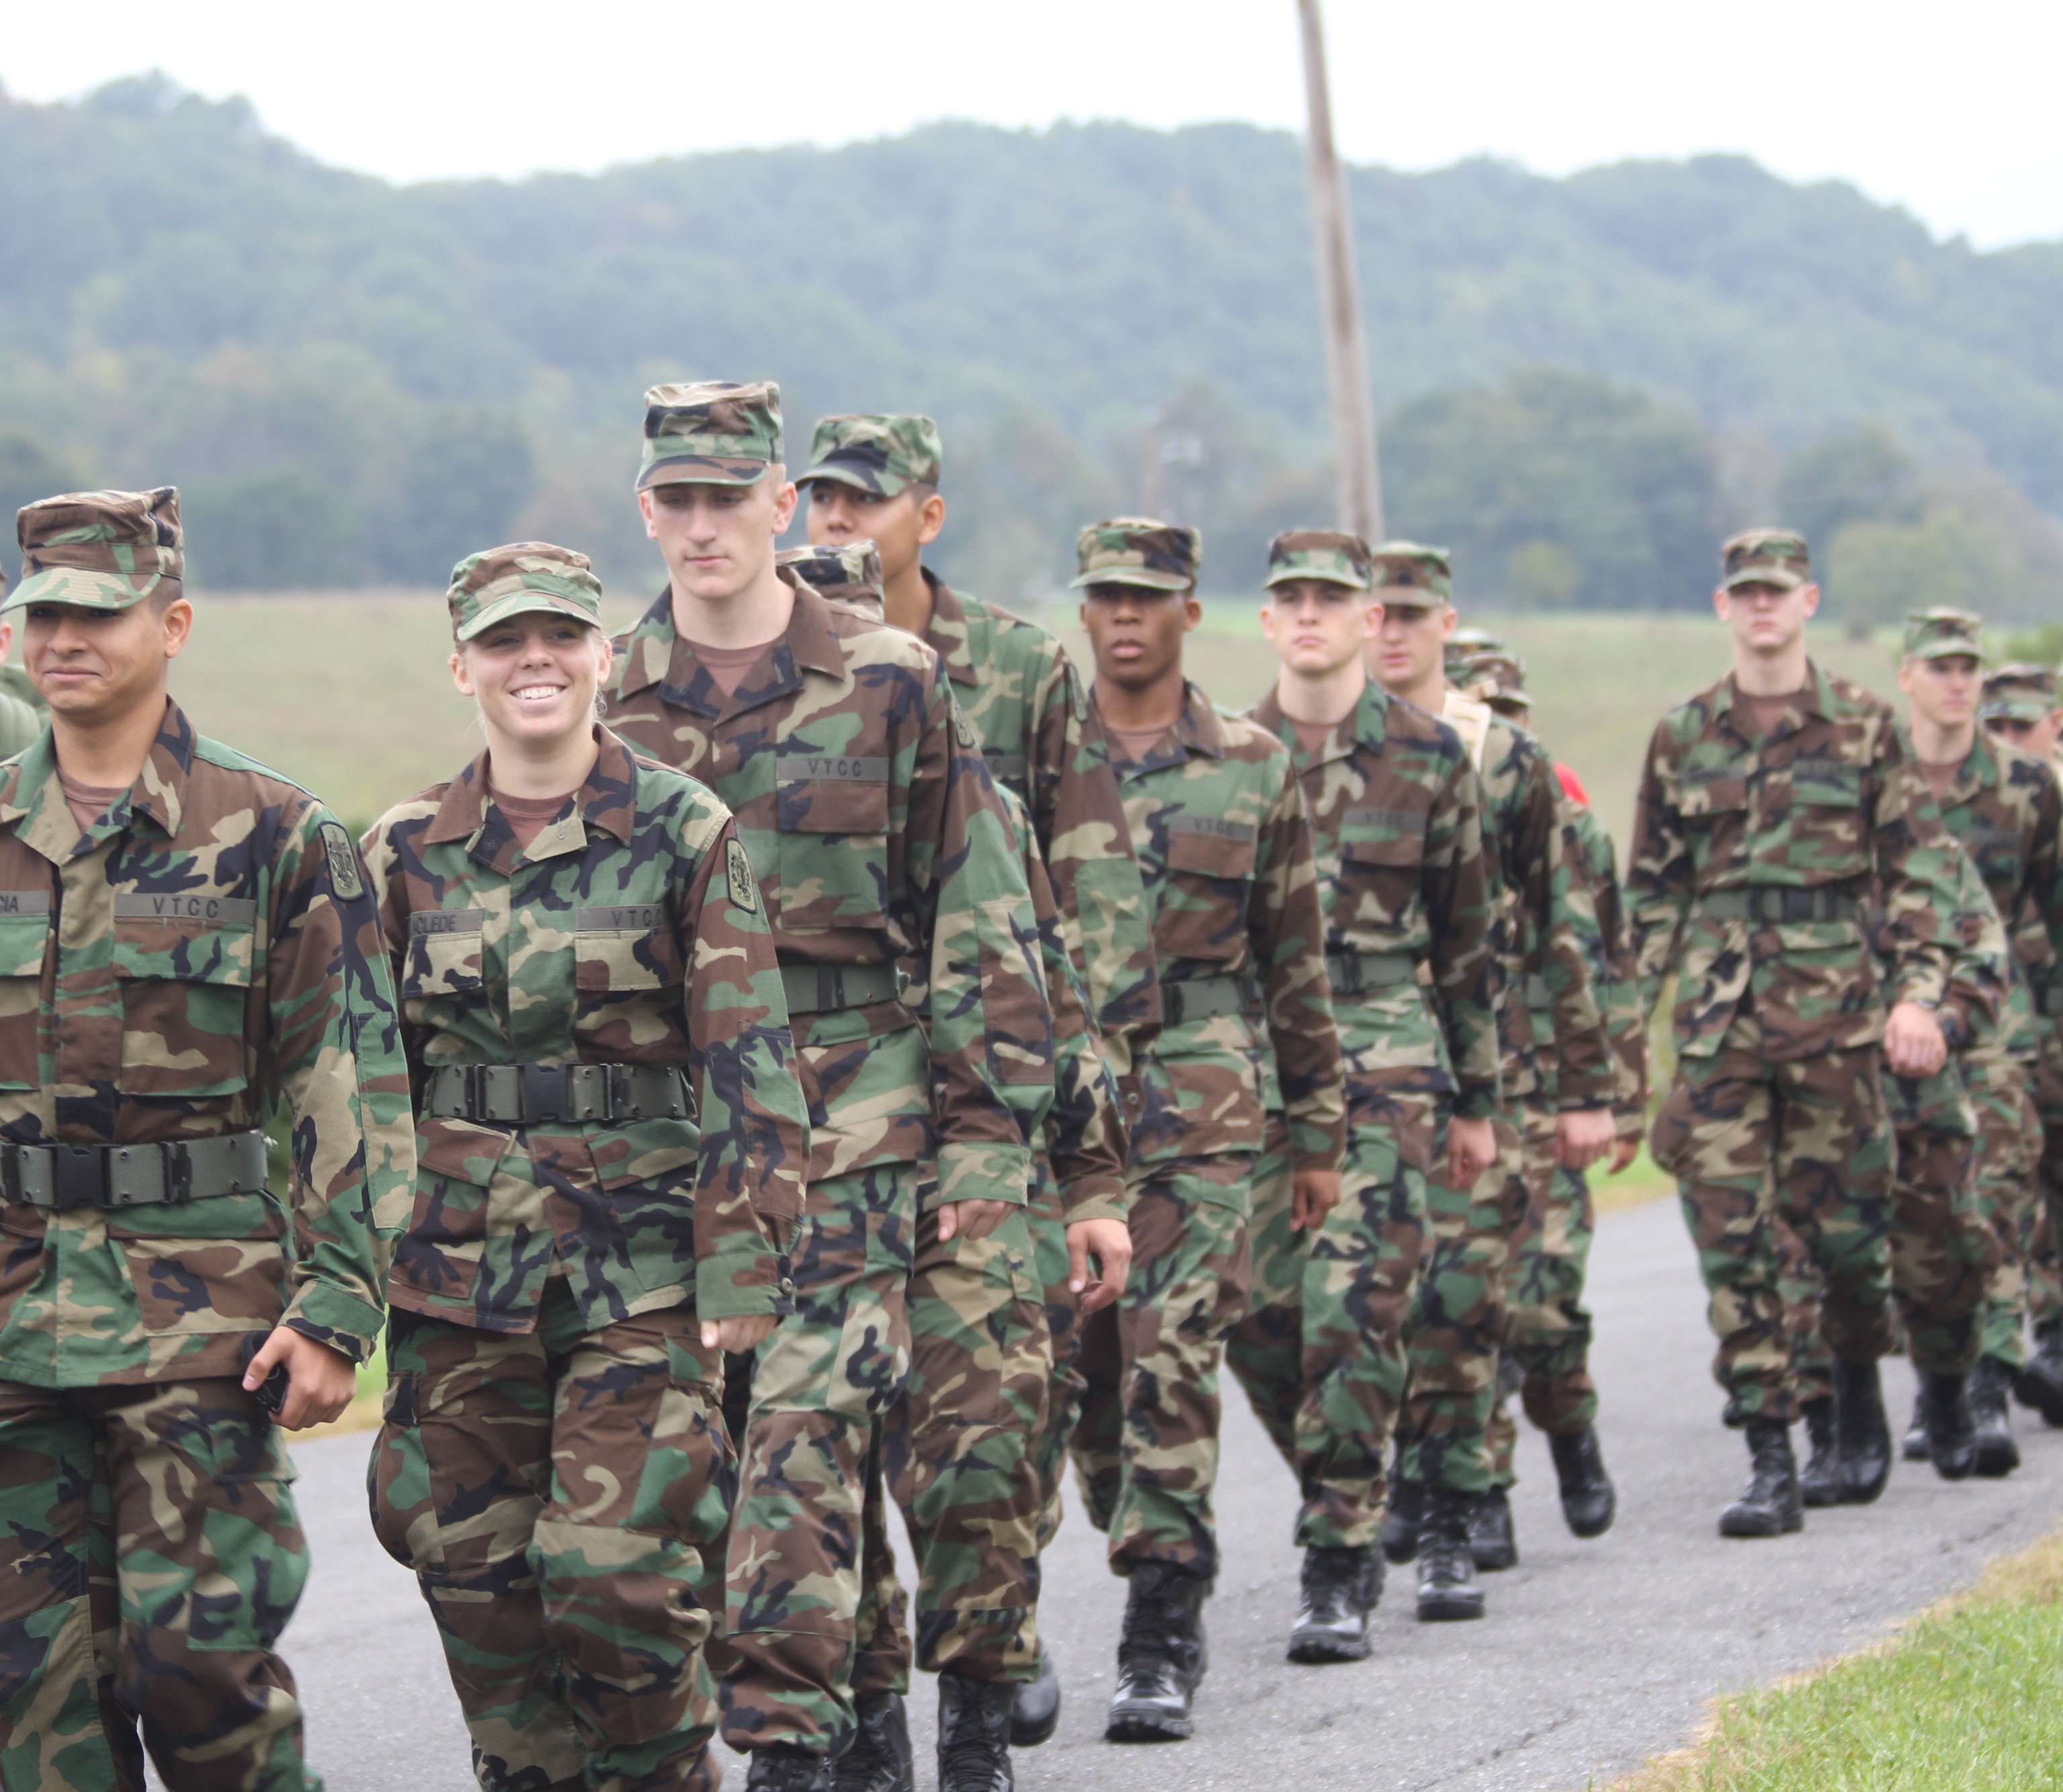 Members of the Virginia Tech Corps of Cadets Class of 2015 on the Fall 2011 Caldwell March in Craig County, Va.